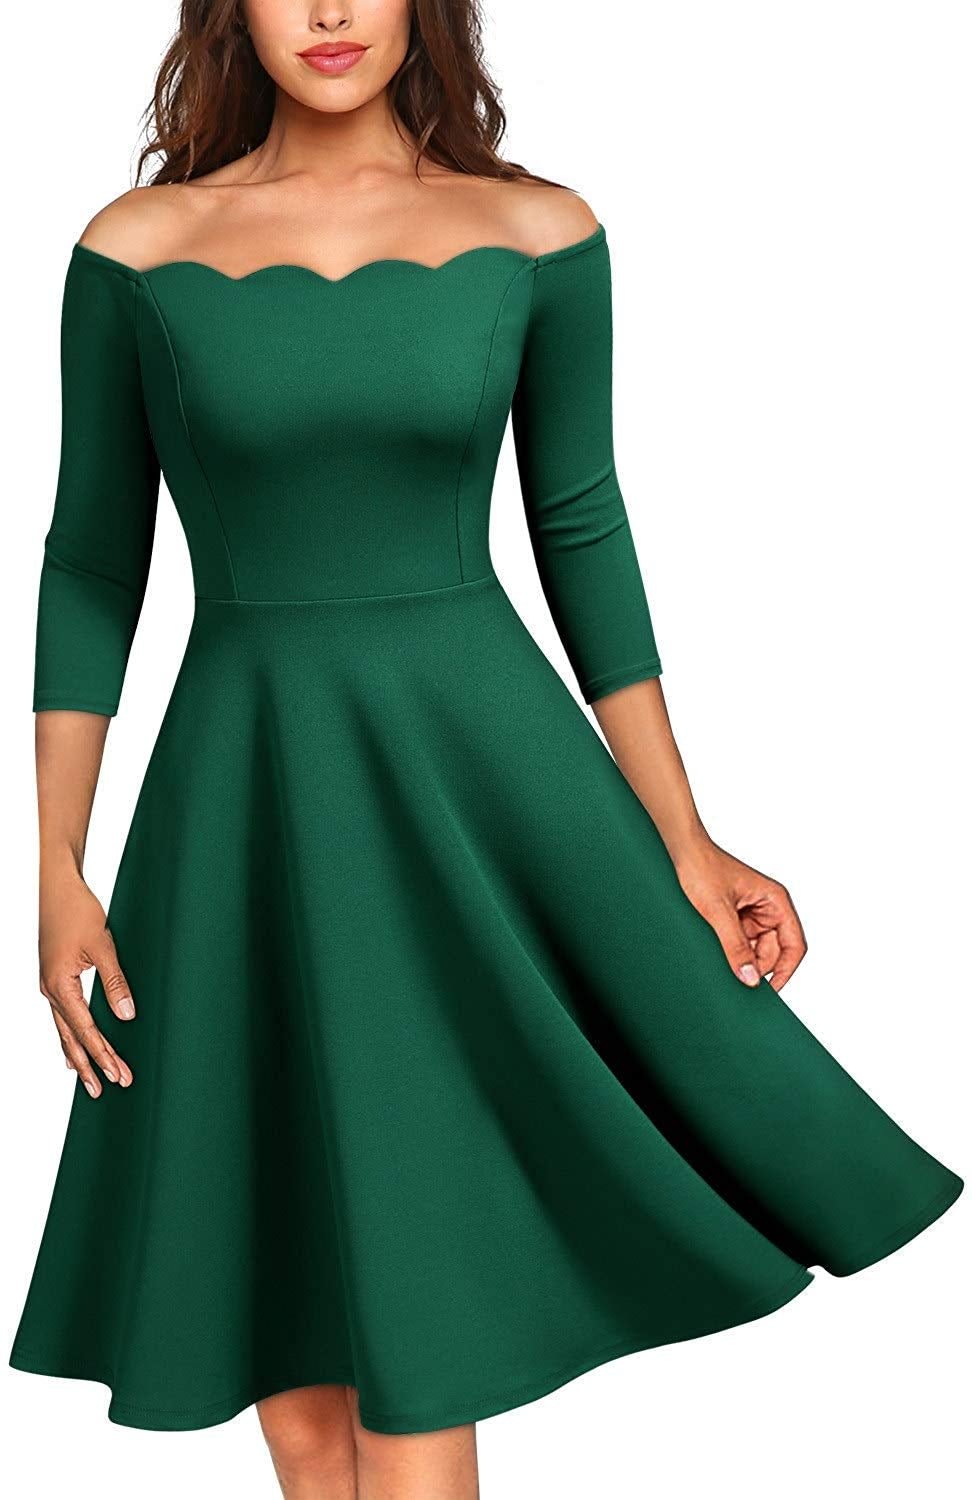 Women's Vintage Cocktail Party Half Sleeve Boat Neck Swing Dress